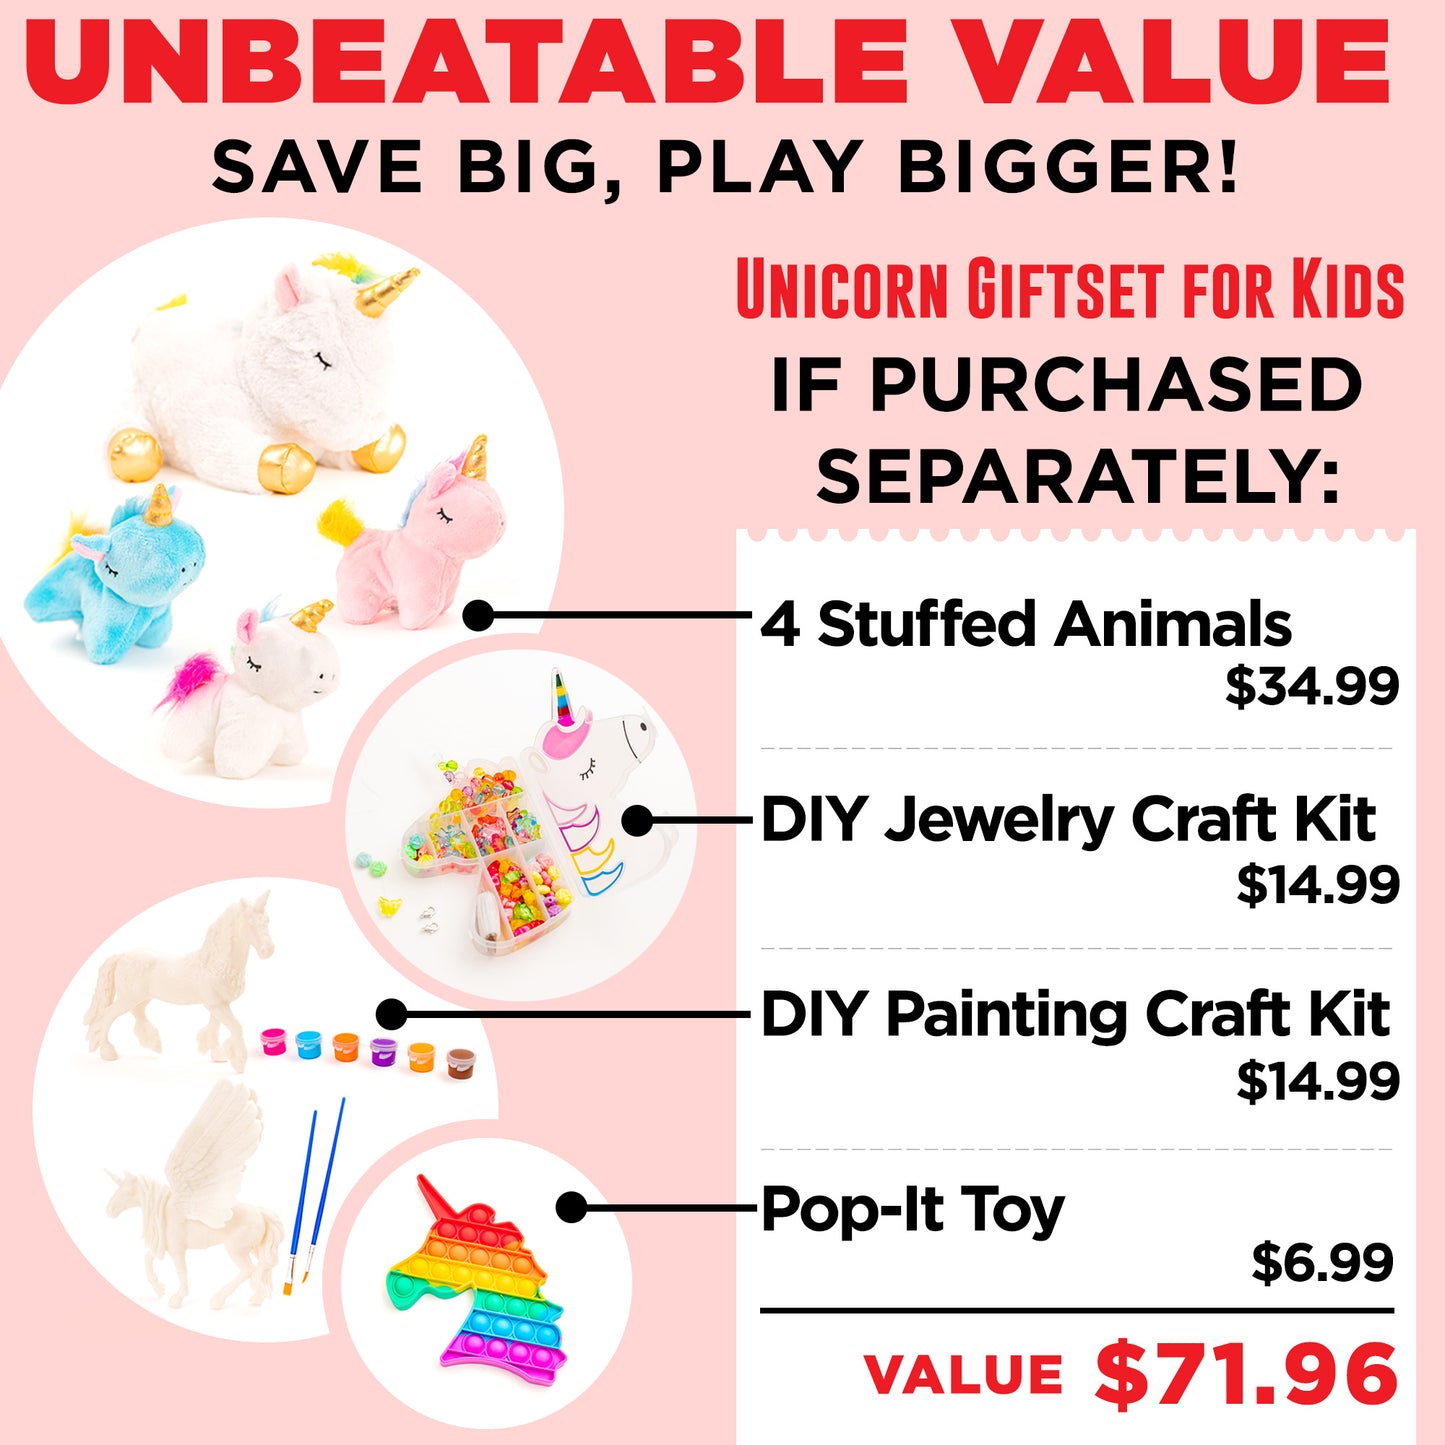 STEM-Certified Unicorn Giftset - A Showcase Gift for Girls Complete w/ Unicorn Crafts & Unicorn Toys - Includes Mama & Baby Unicorn Family, Painting Kit, DIY Jewelry & More